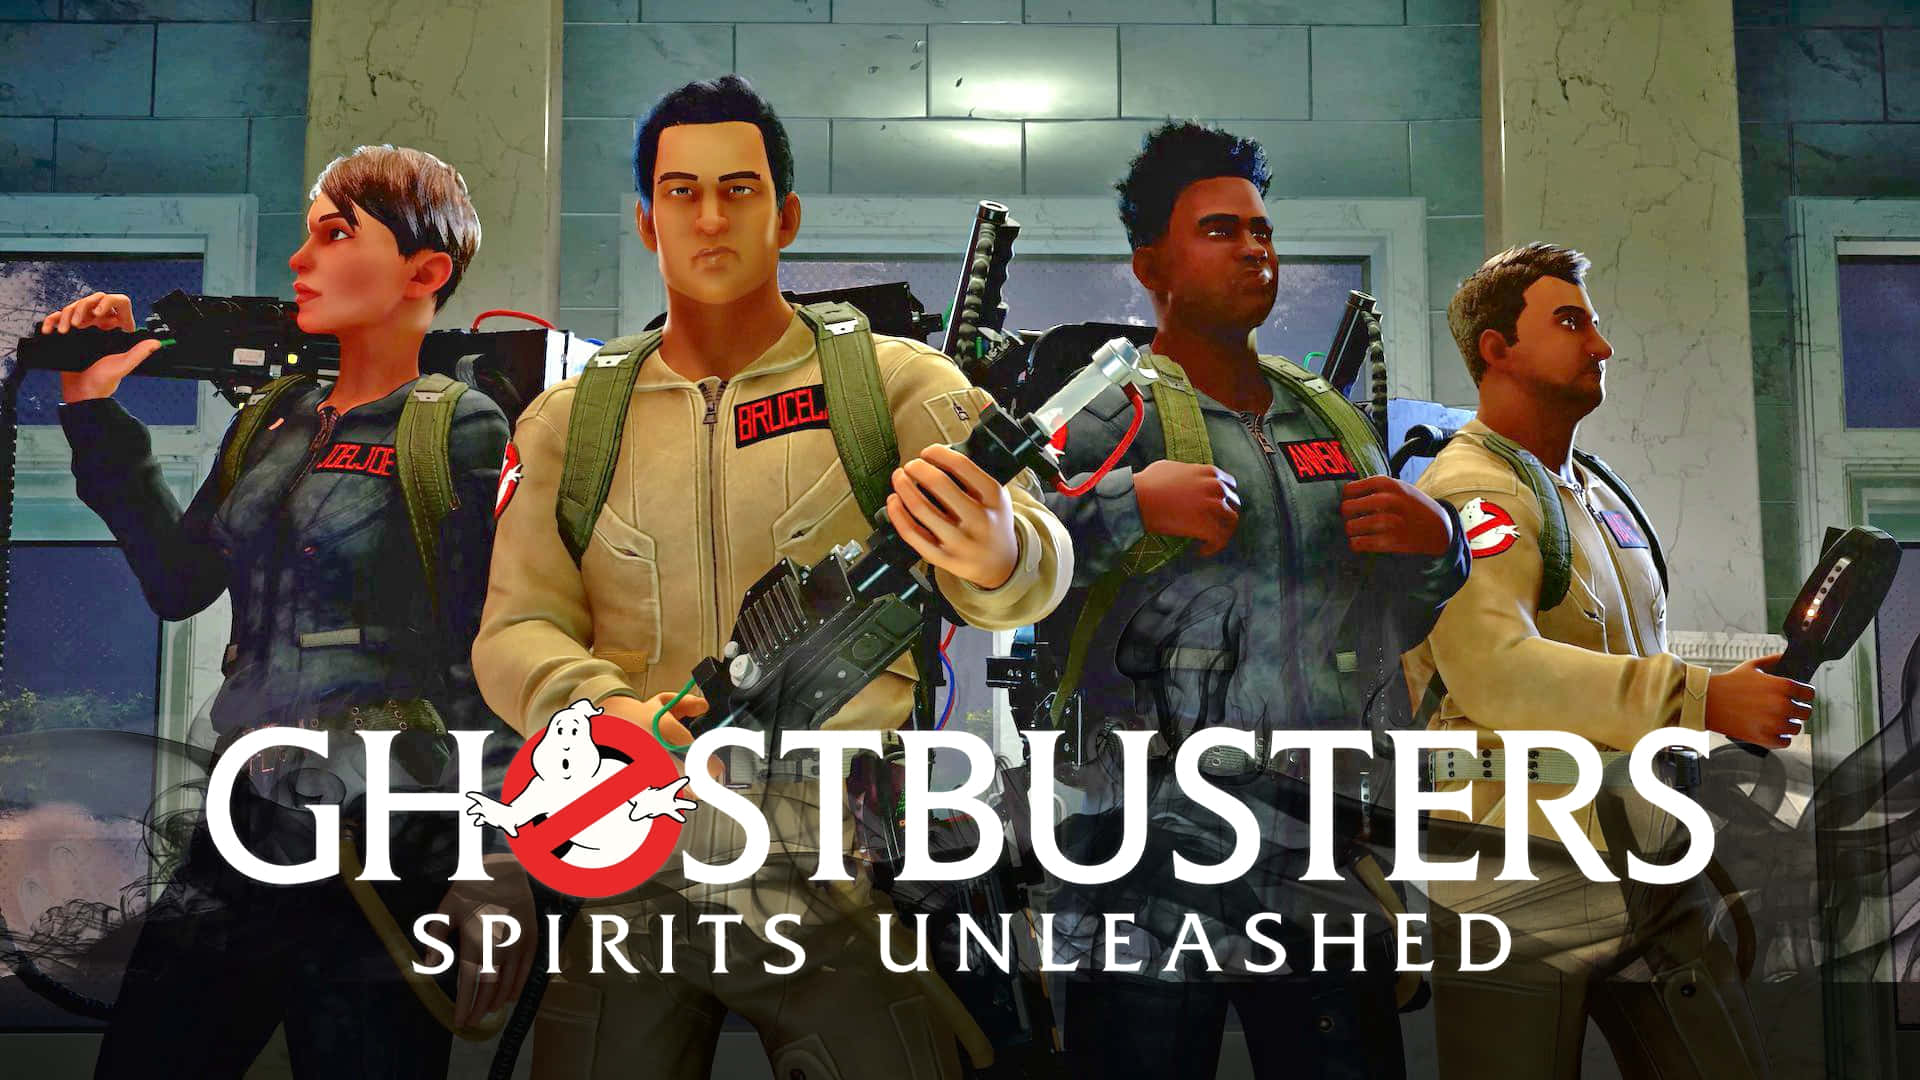 Ghostbusters harnessing their proton packs.